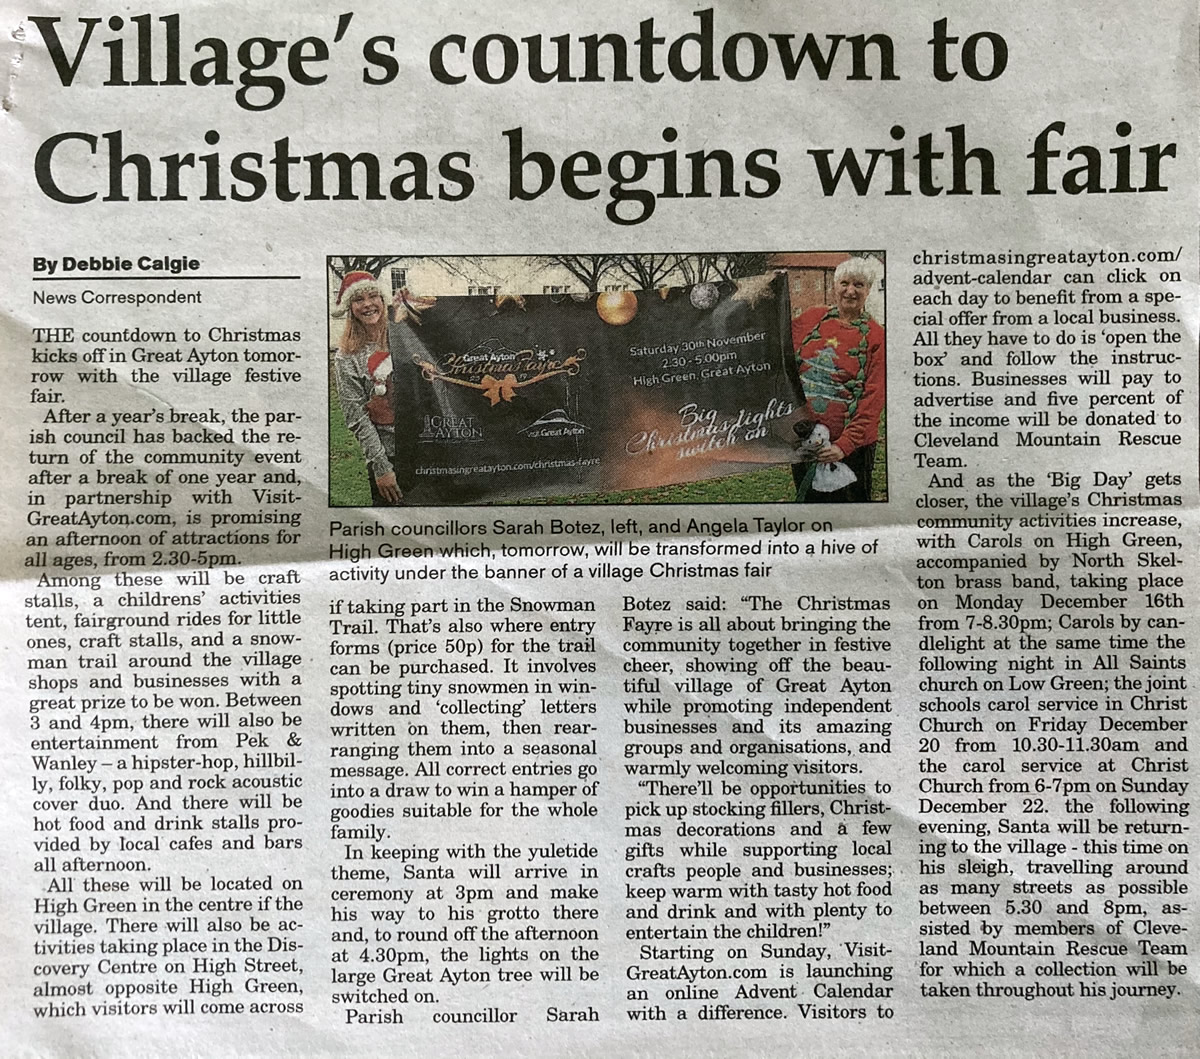 Visit Great Ayton on Village's countdown to Christmas begins with fair